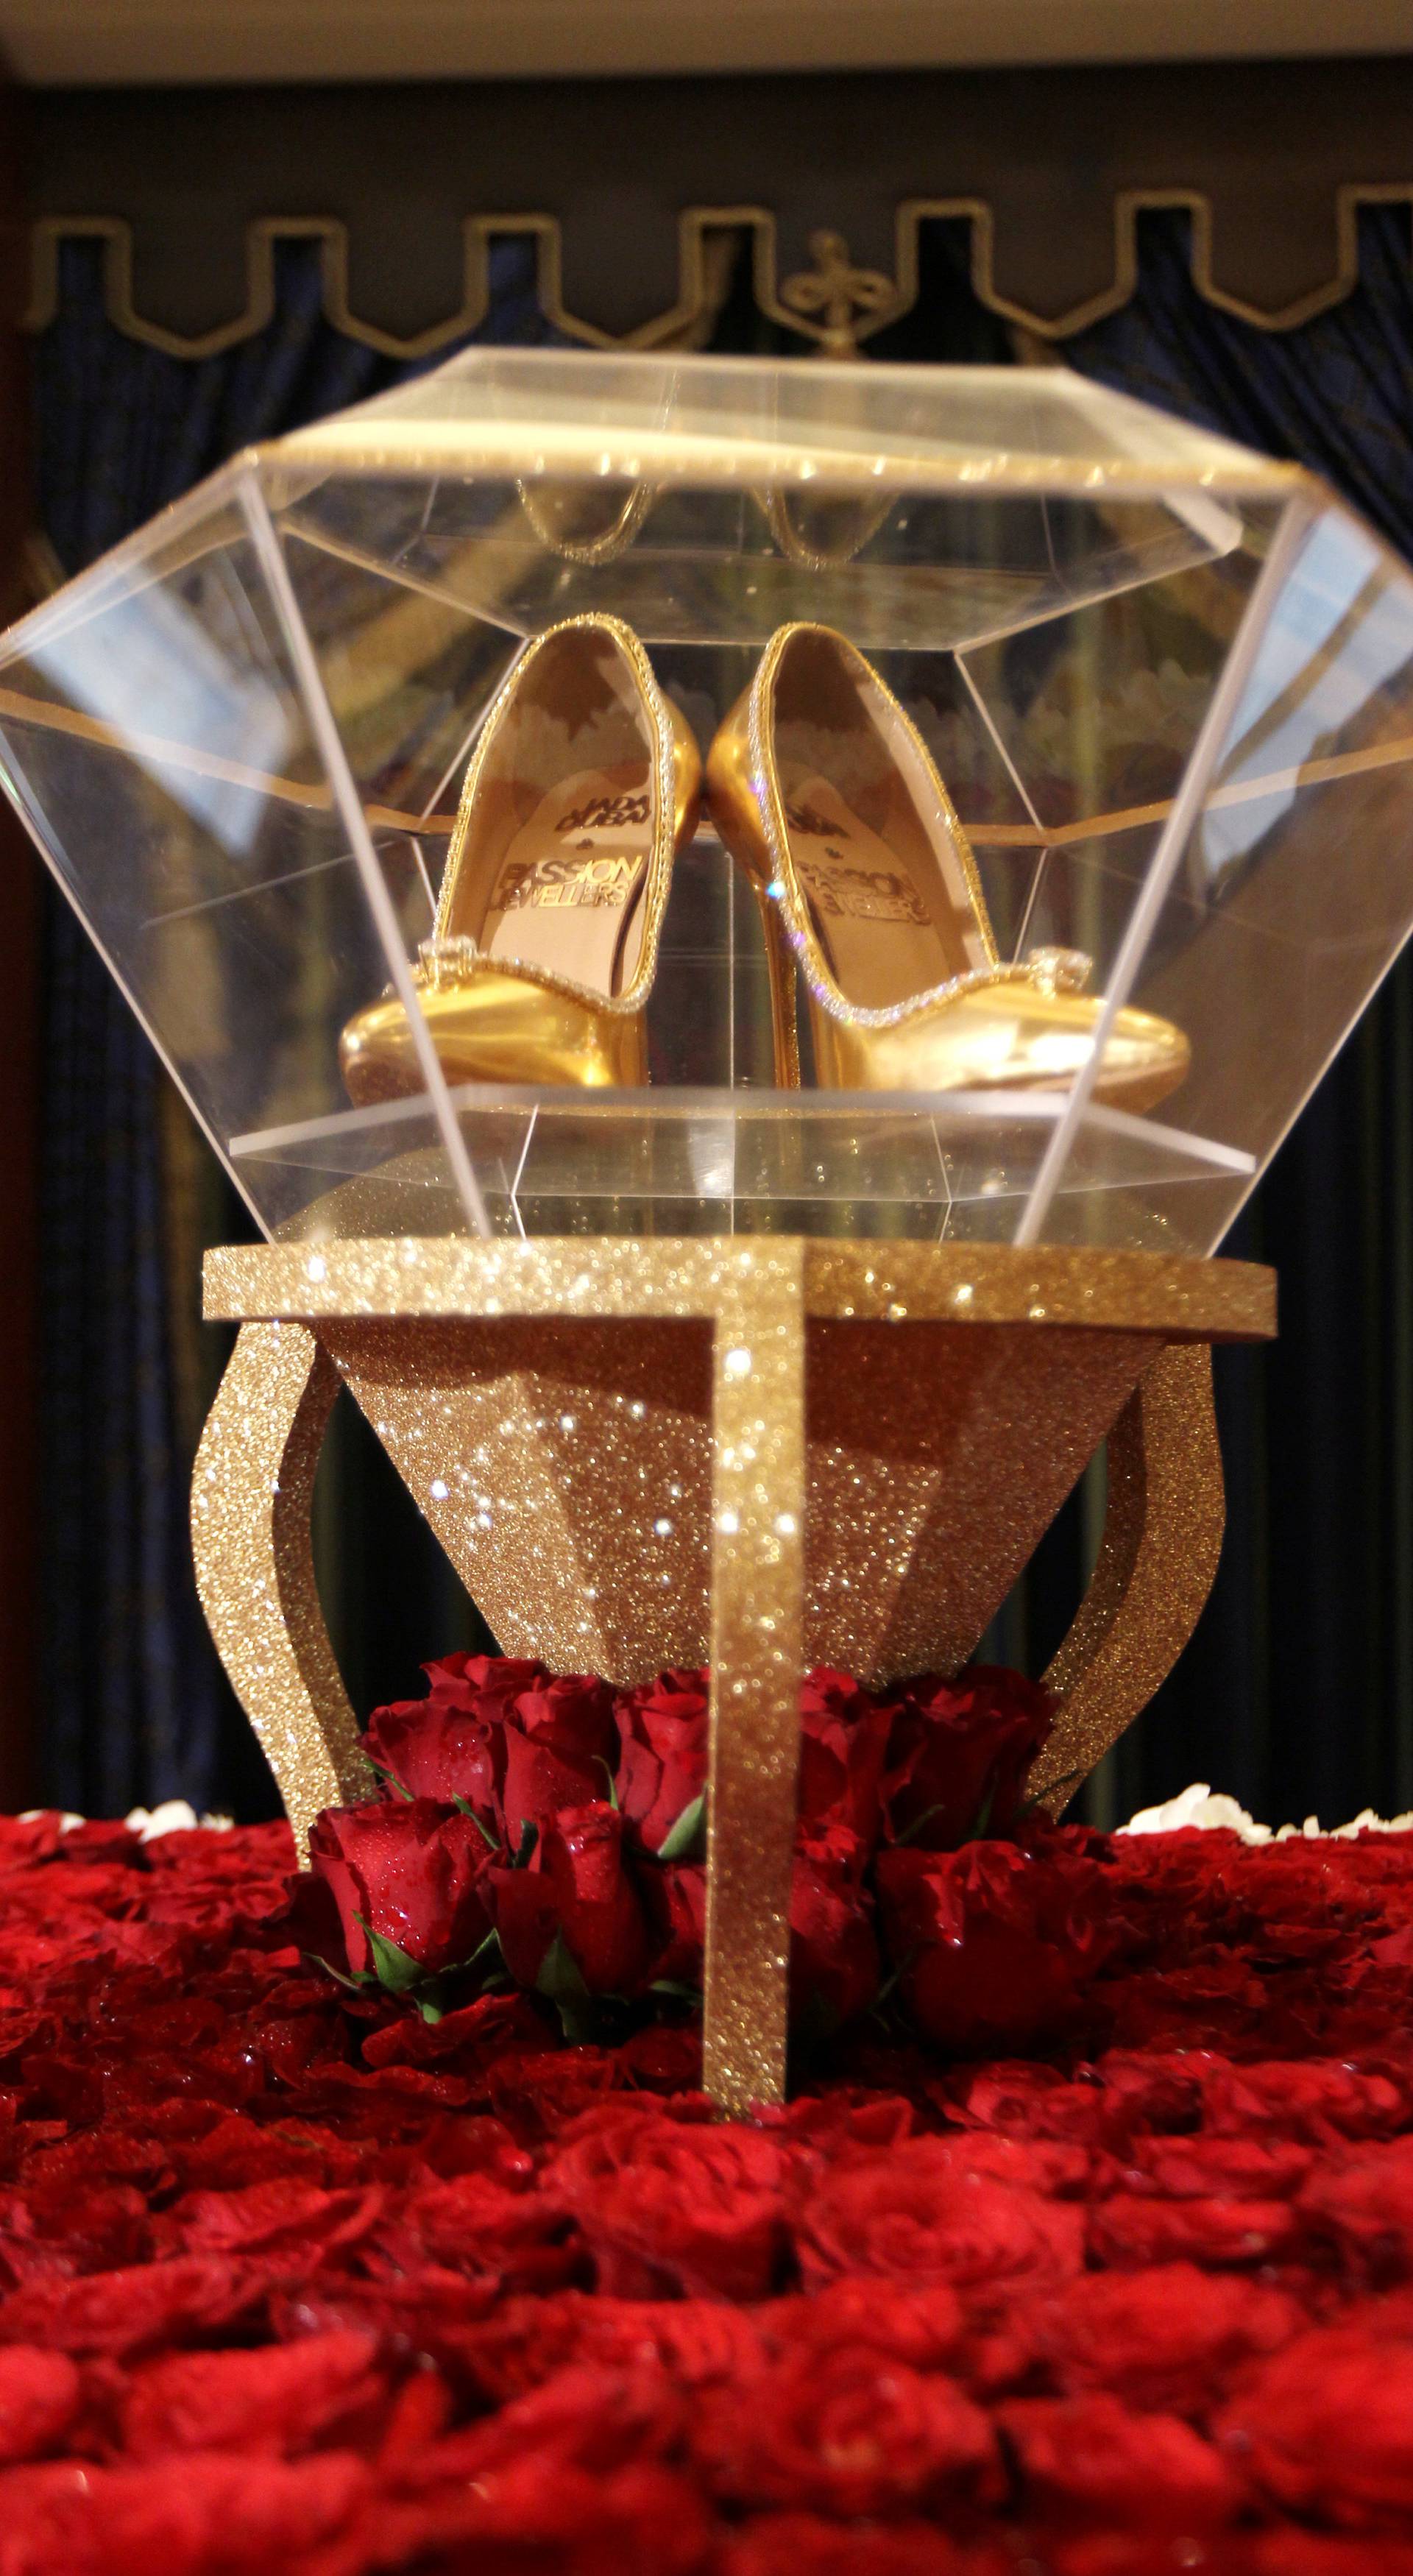 A $17 million USD pair of shoes displayed at the Burj Al Arab Hotel in Dubai